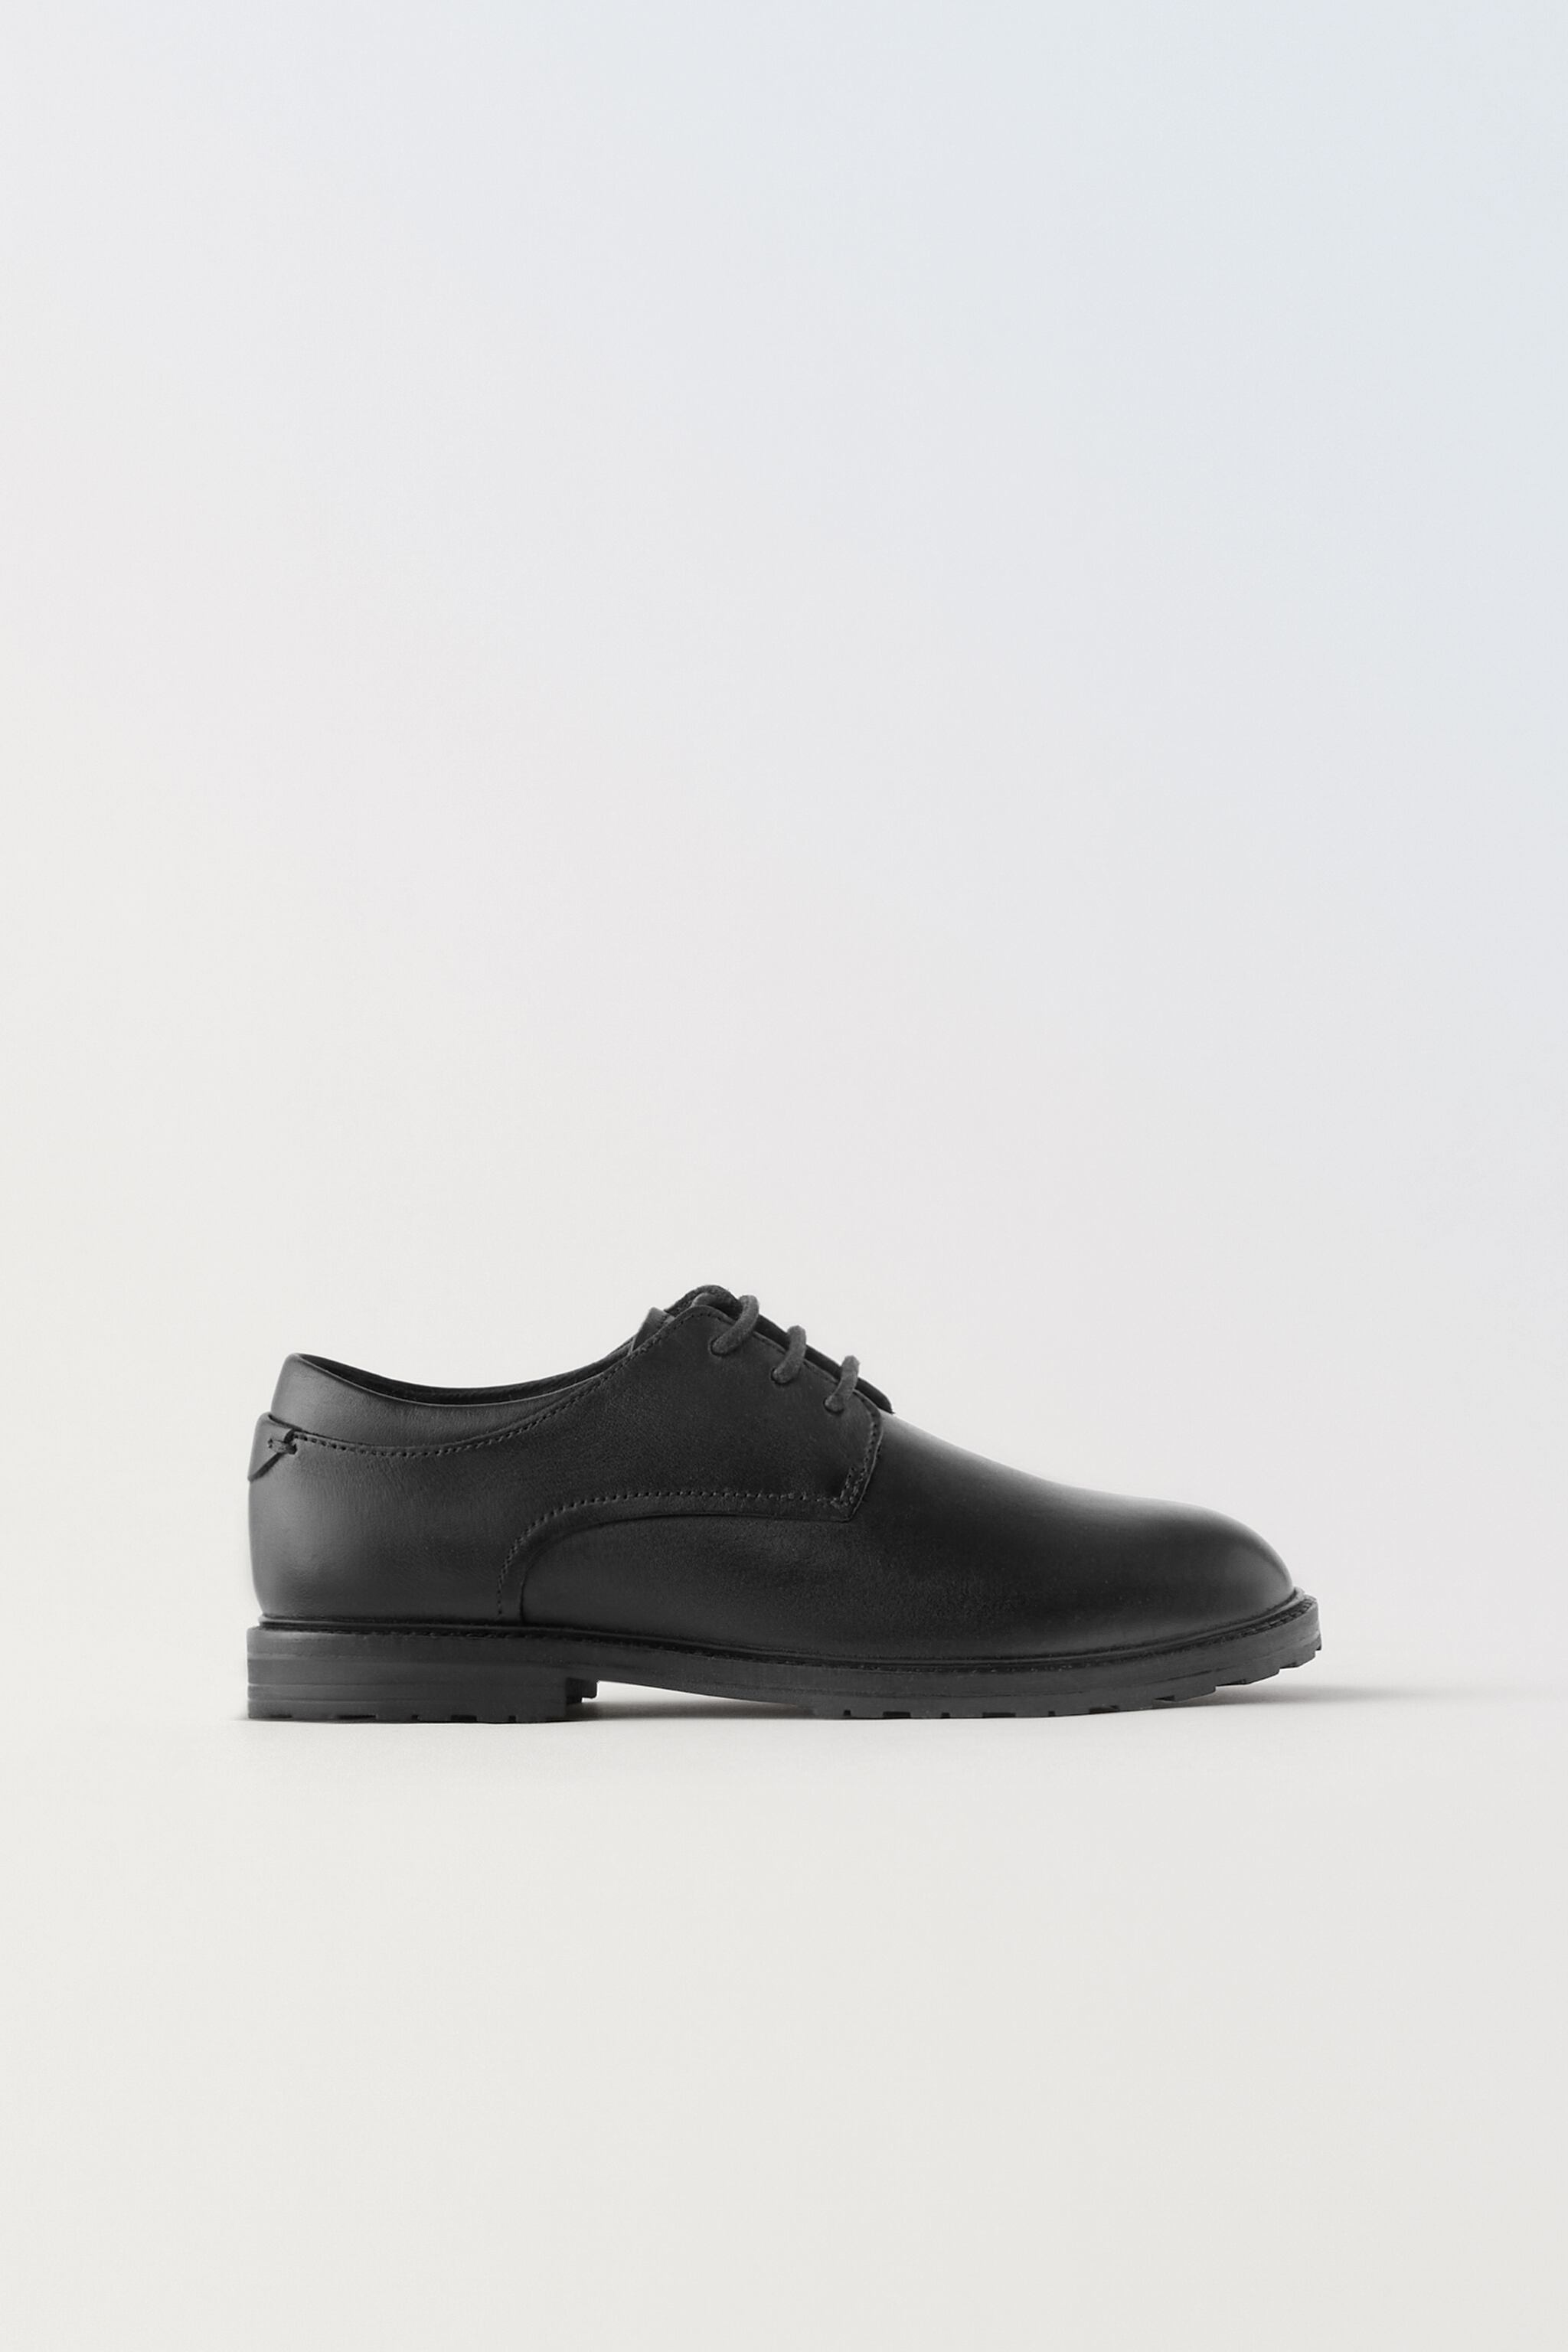 LEATHER DERBY SHOES